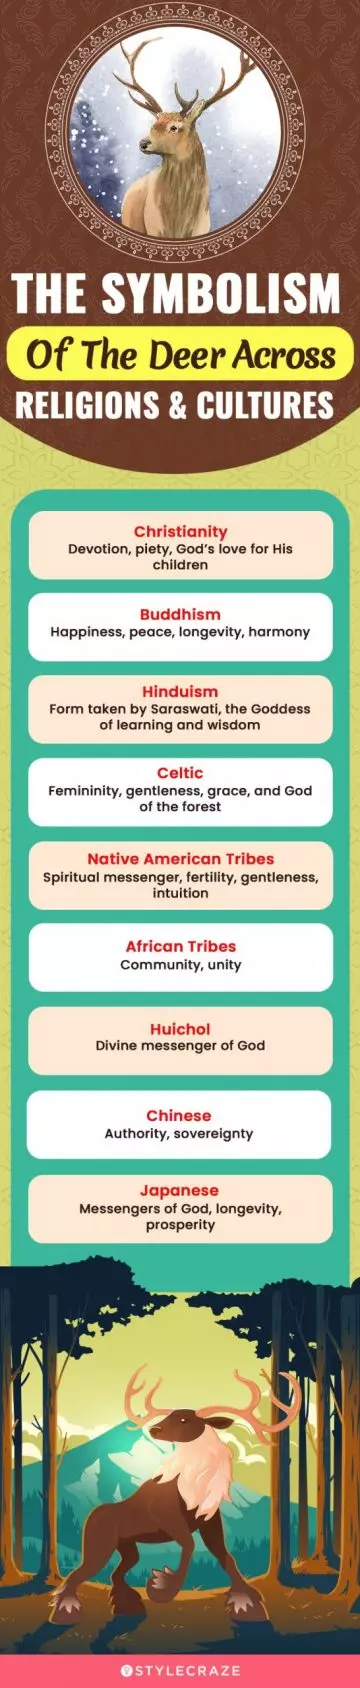 the symbolism of the deer across religions & cultures (infographic)